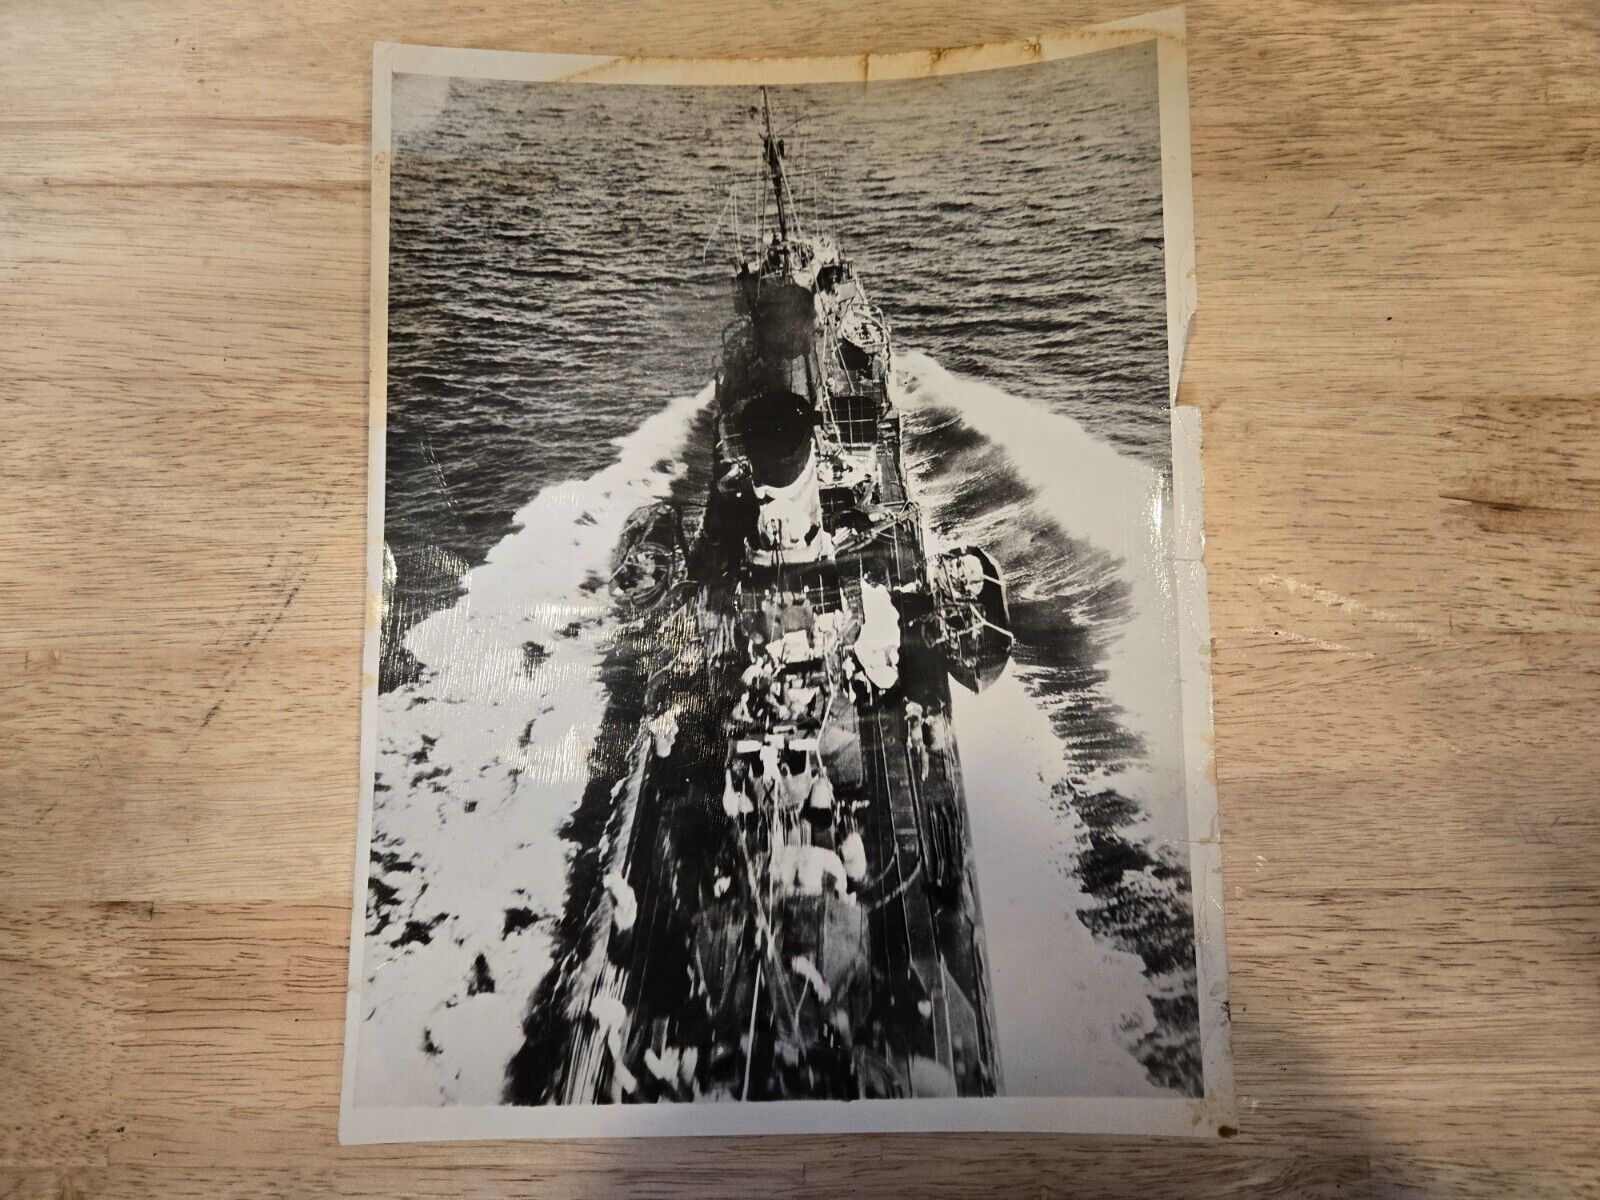 ORG WWII PHOTO OVERVIEW OF UNKNOWN BATTLESHIP ON OPEN SEA NO REFERENCE